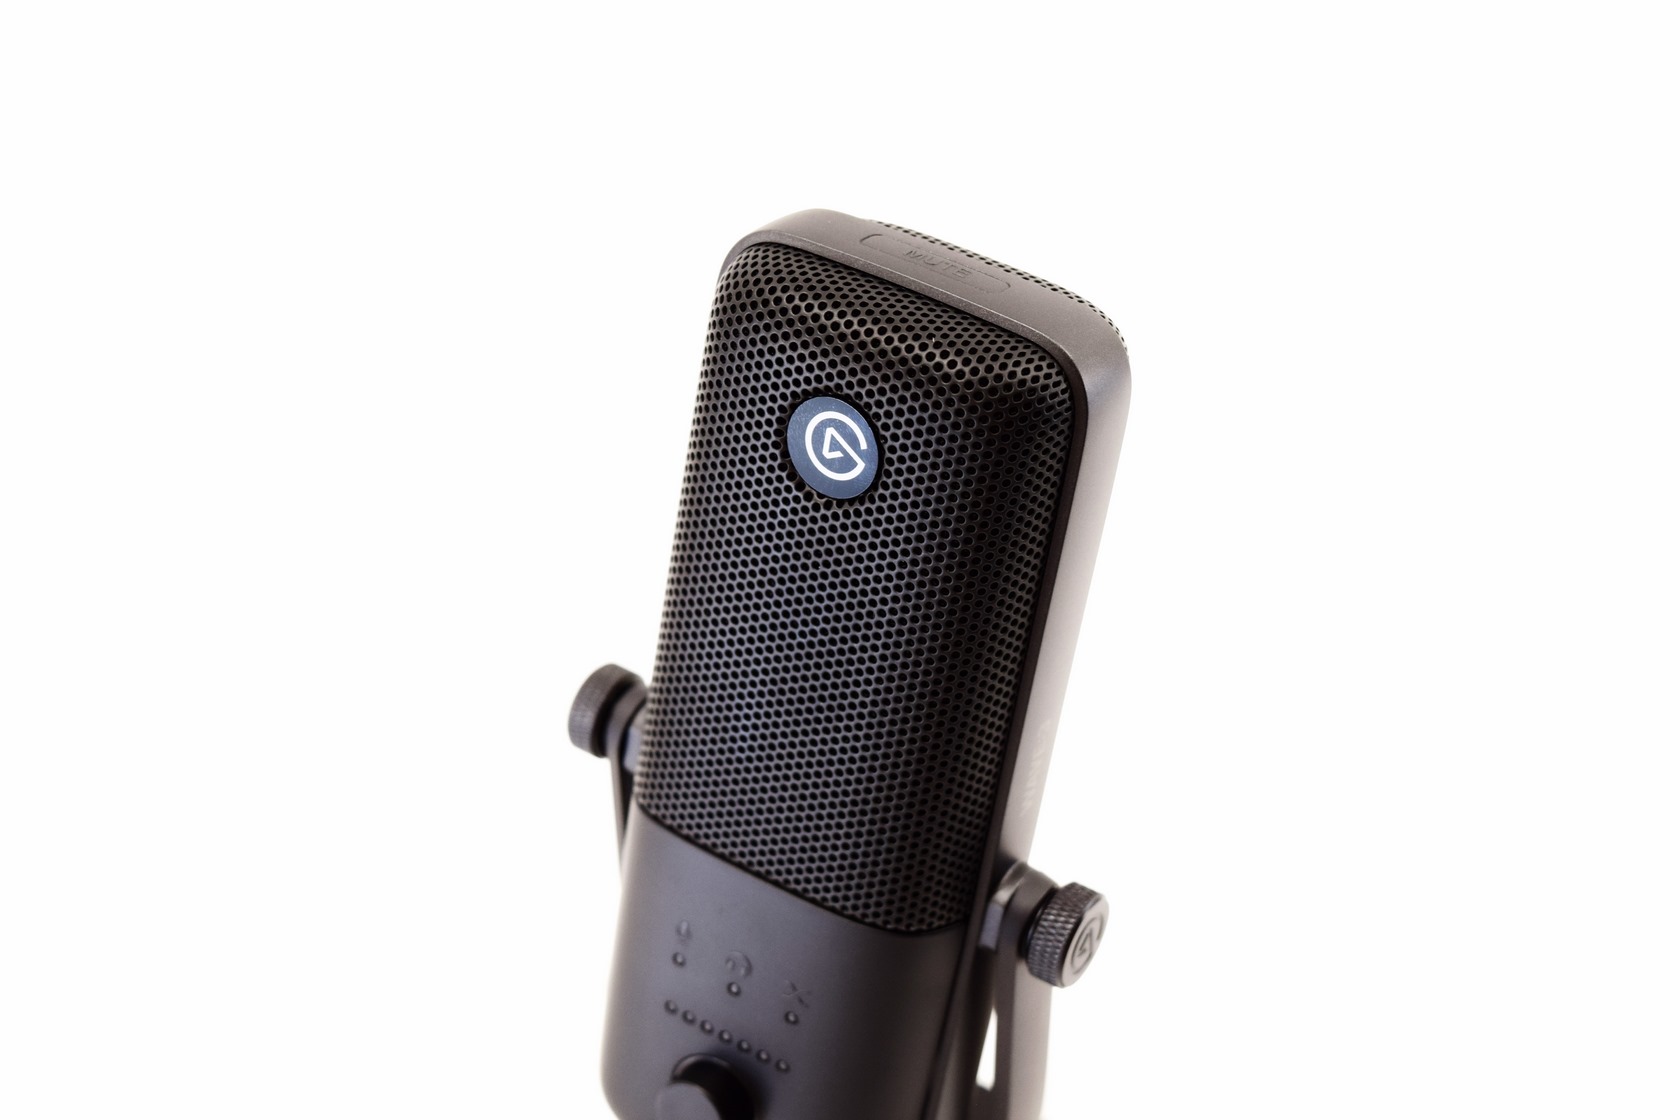 Elgato Wave 3 USB Mic Review / Test (Compared to Snowball, Yeti